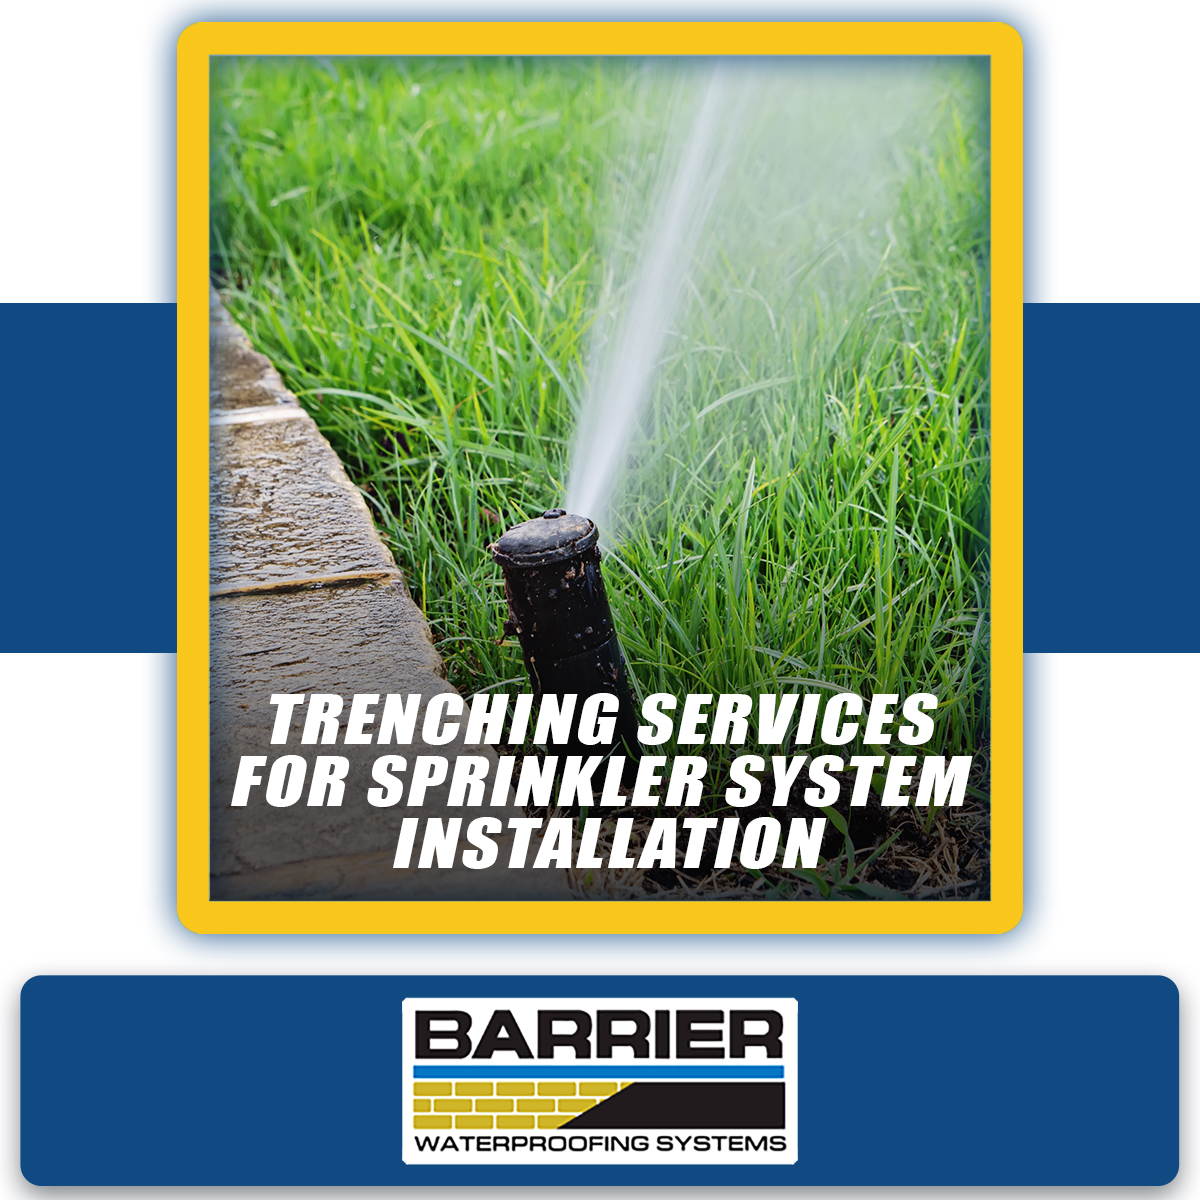 Trenching-Services-for-Sprinkler-System-Installation